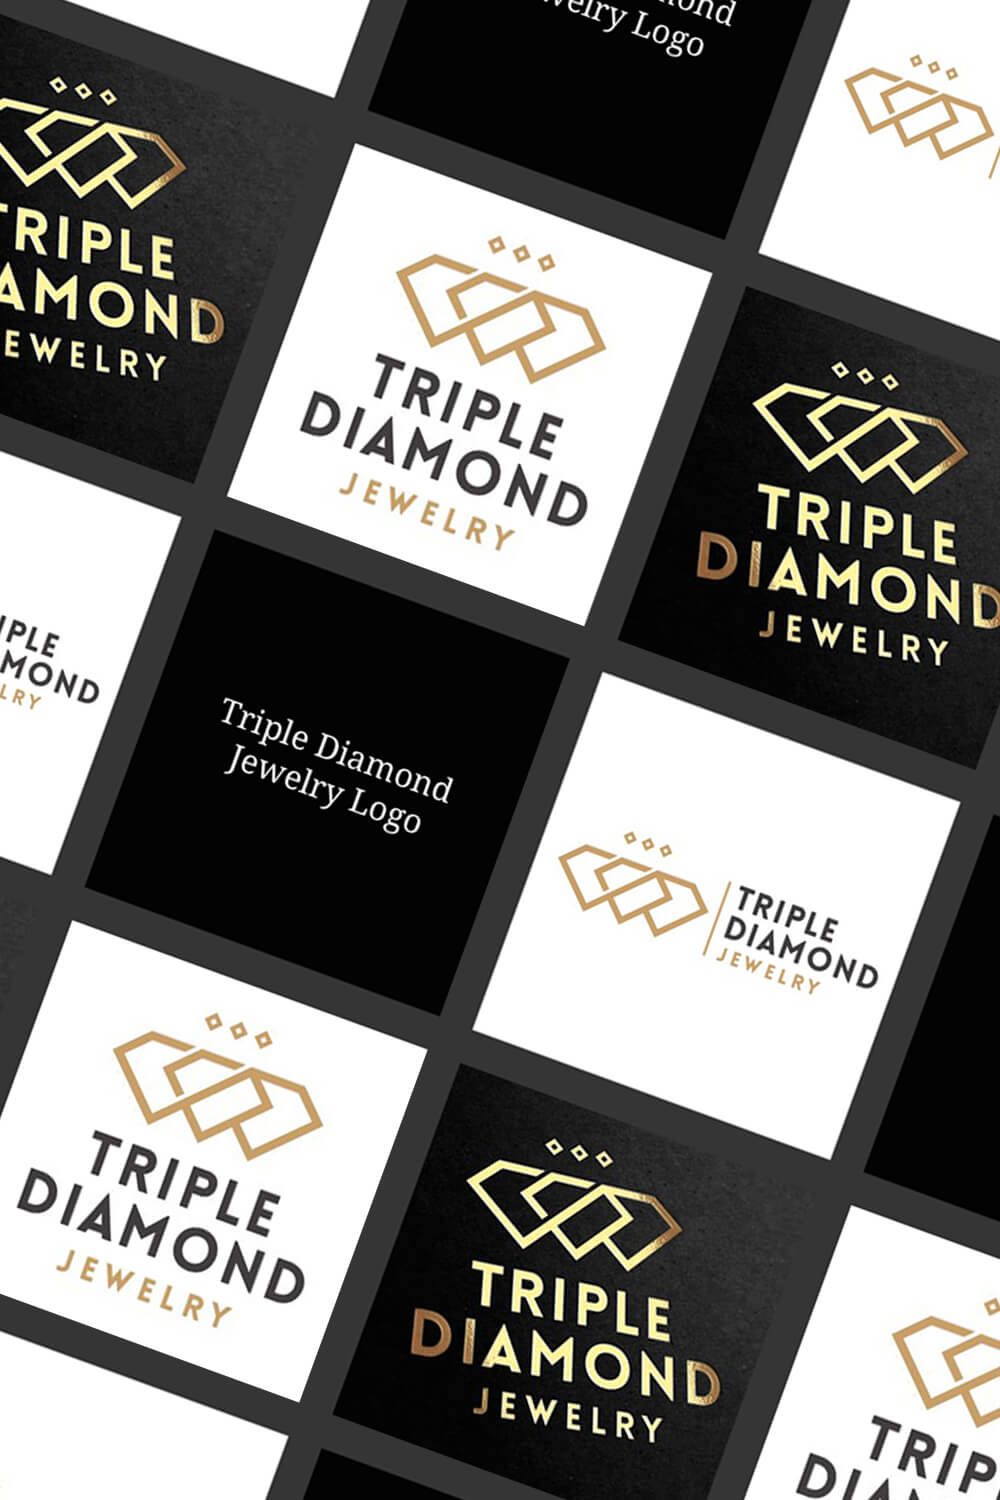 Lots of "Triple Diamond Jewelry" logos in black and white checkerboards.